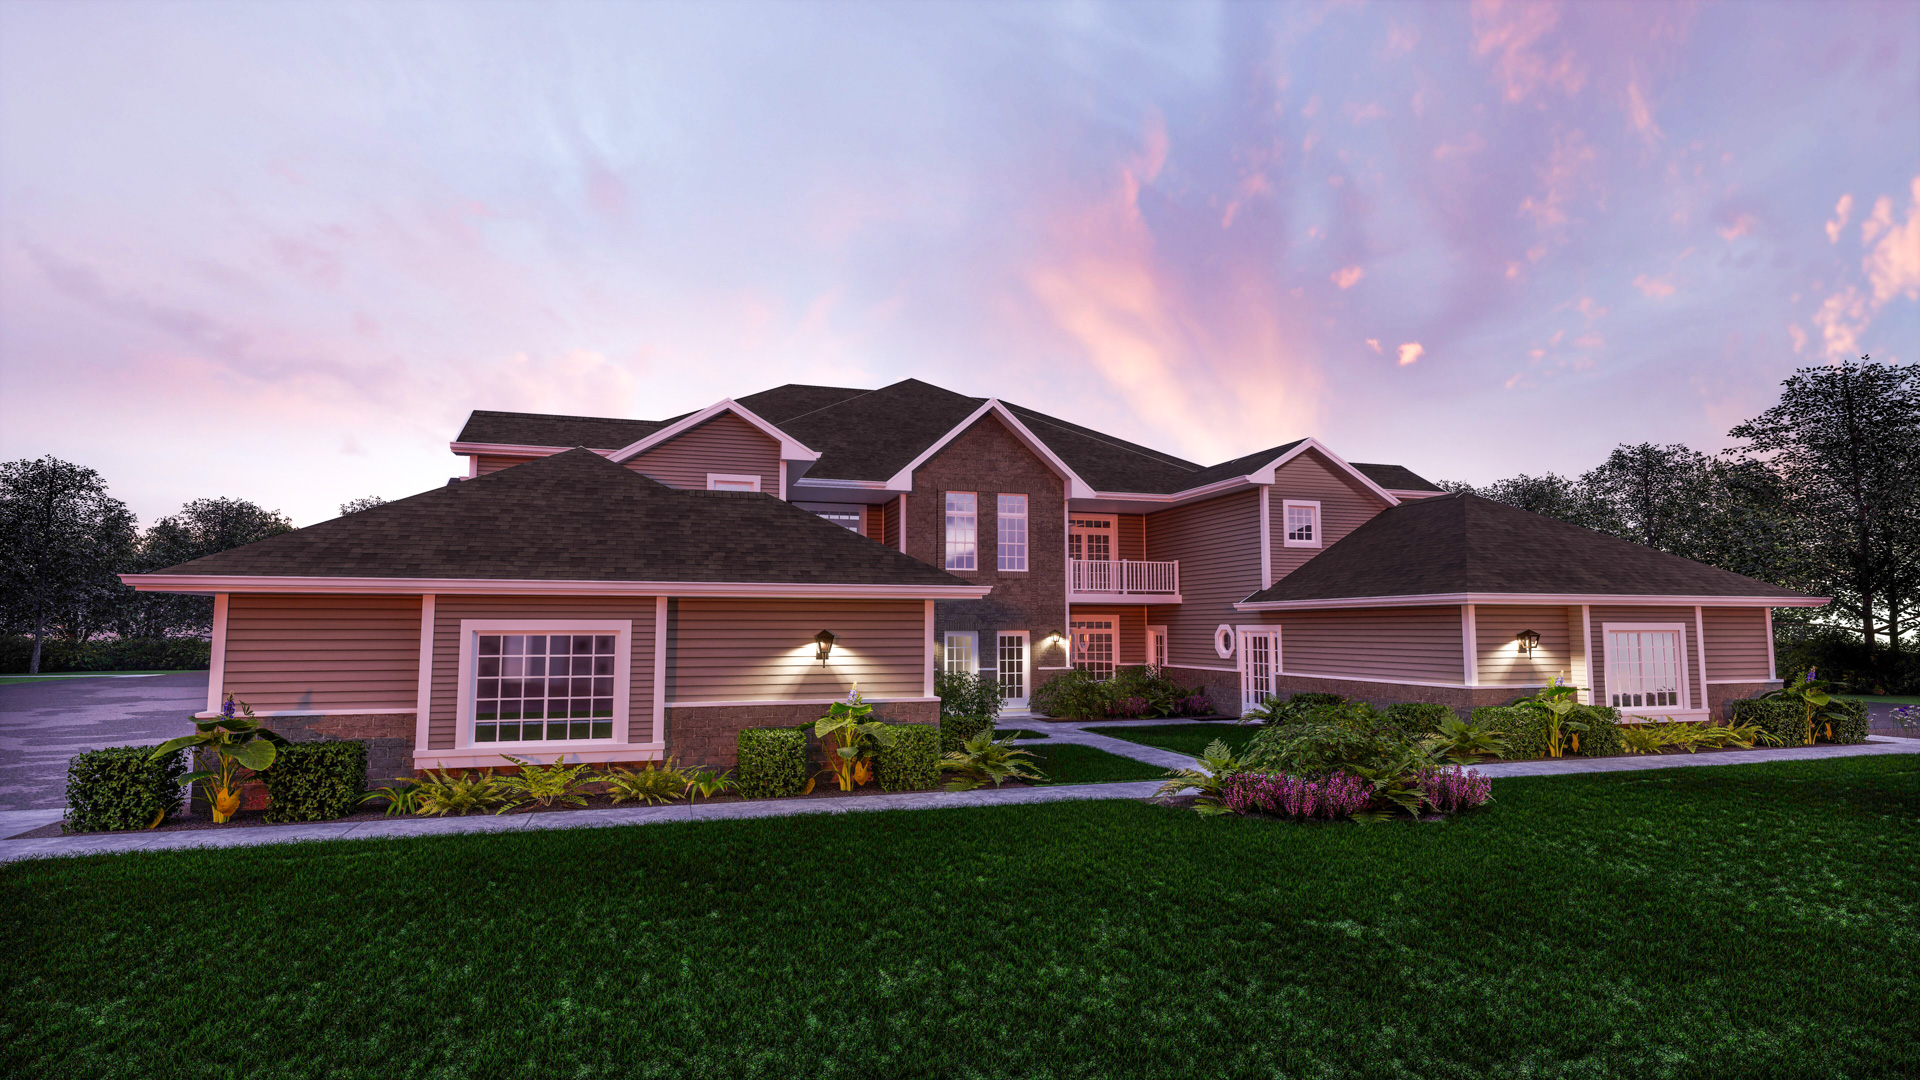 Edgewood Meadows Condo Rendering Stepping Stone Homes